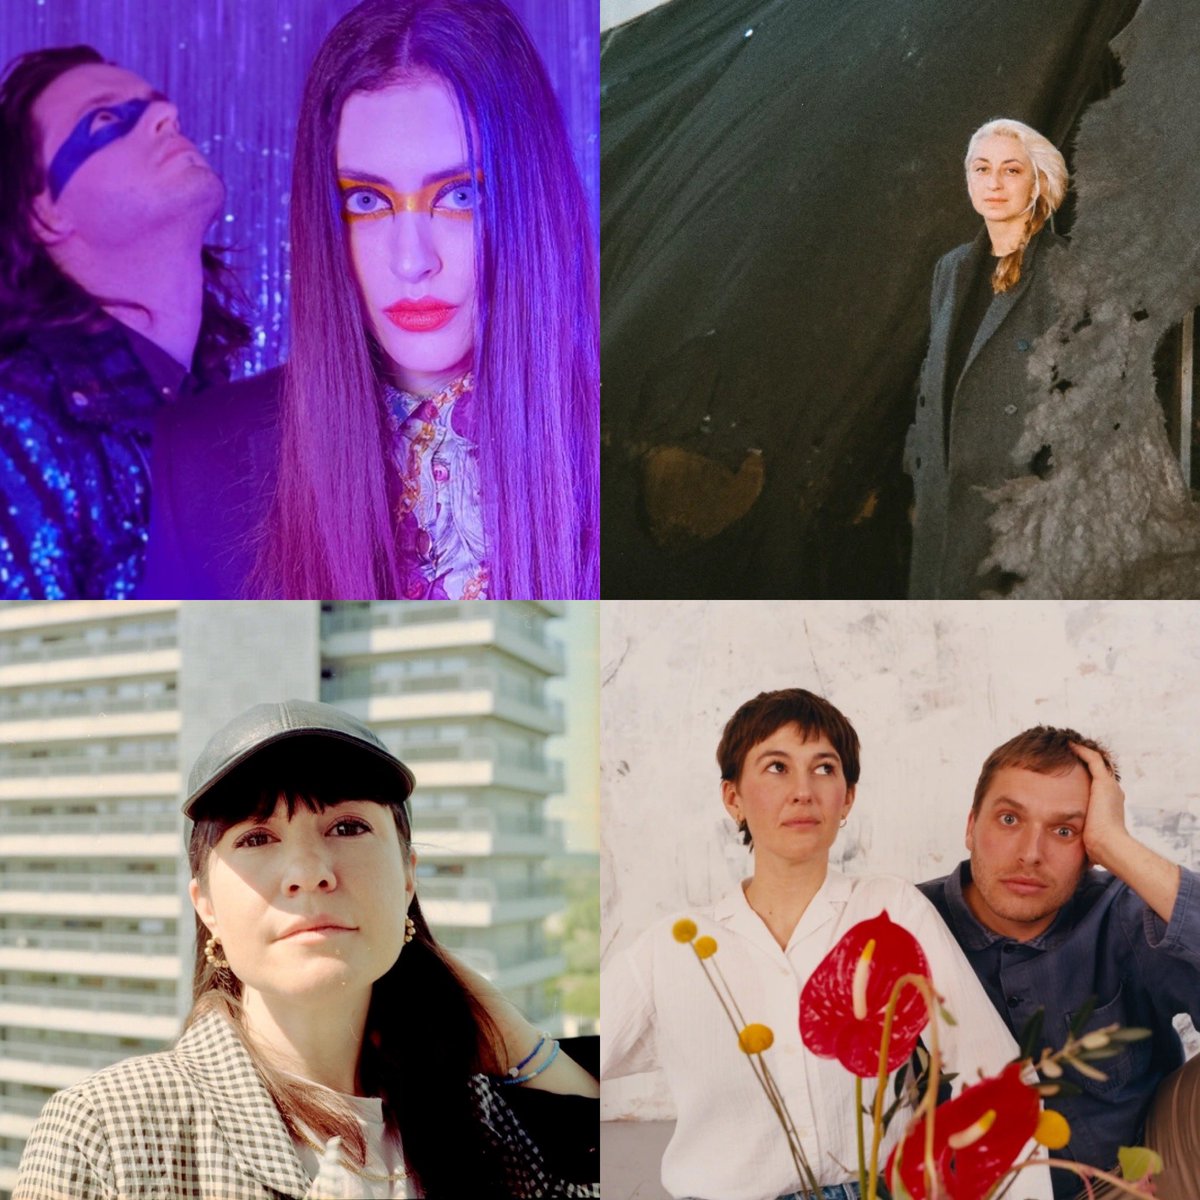 ☀️Brighten up this grim Sunday with some of the awesome new music that's been featured on the website lately - check it all out at getinherears.com now!☀️ #newmusic